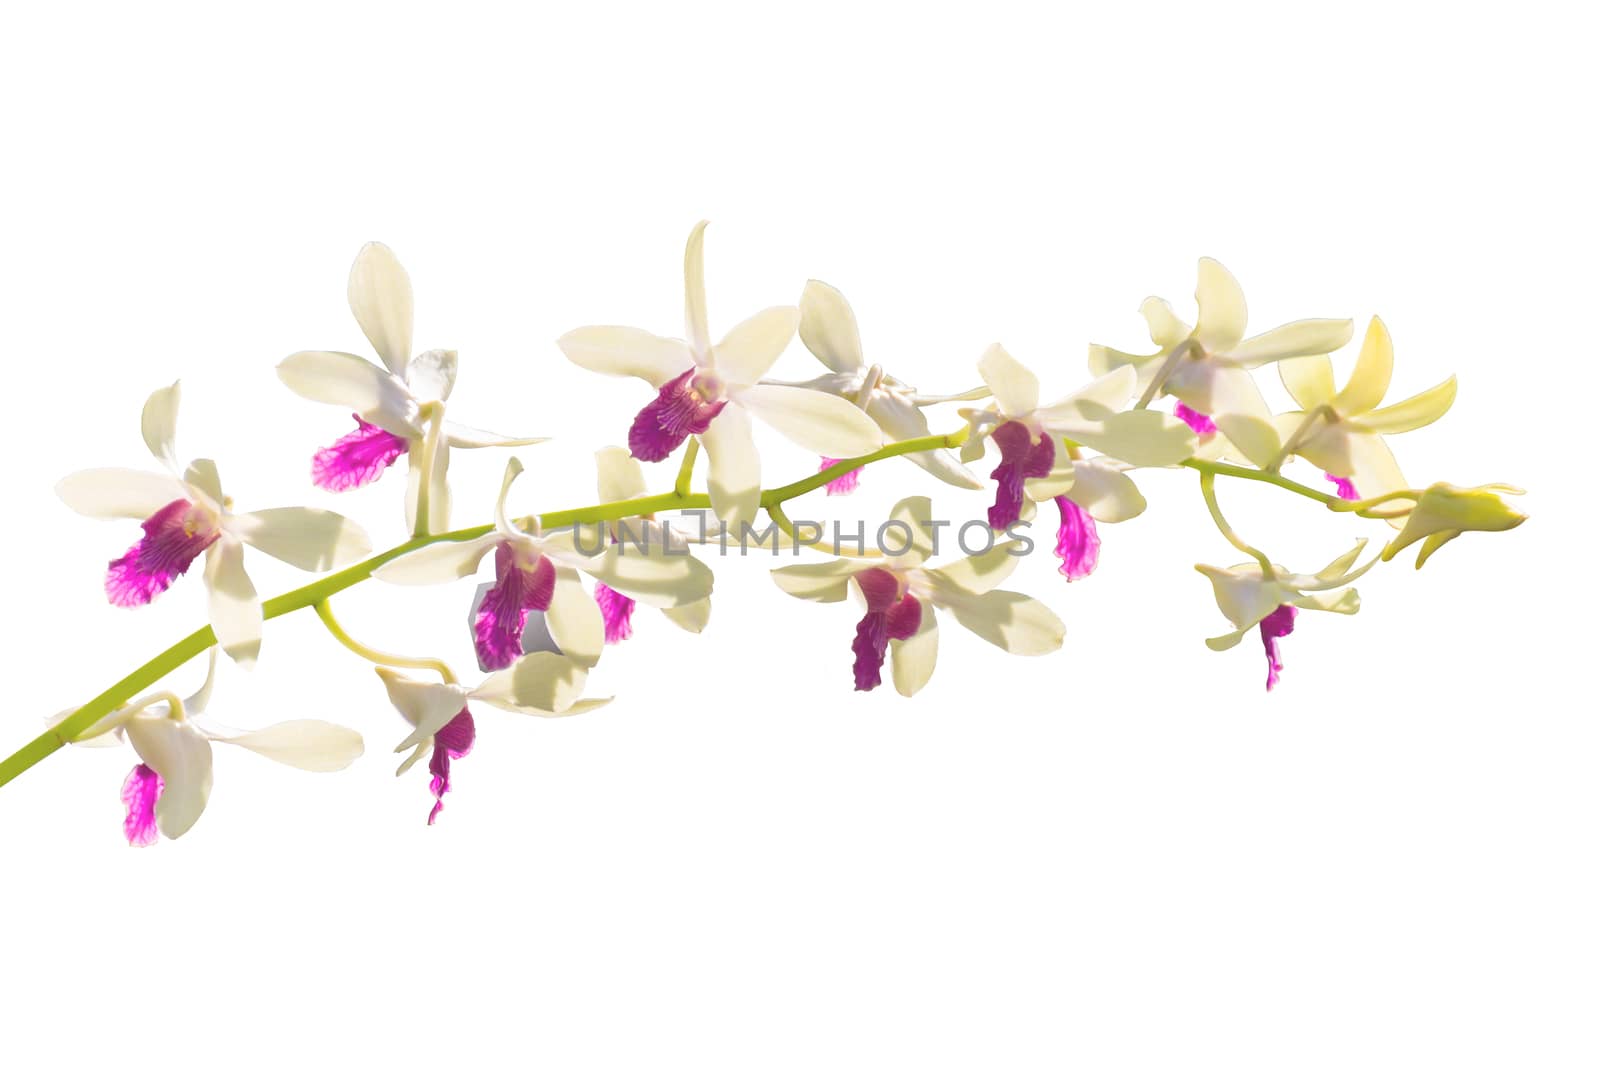 Image Of White And Pink Orchid Flowers Isolated On White Backgro by rakoptonLPN